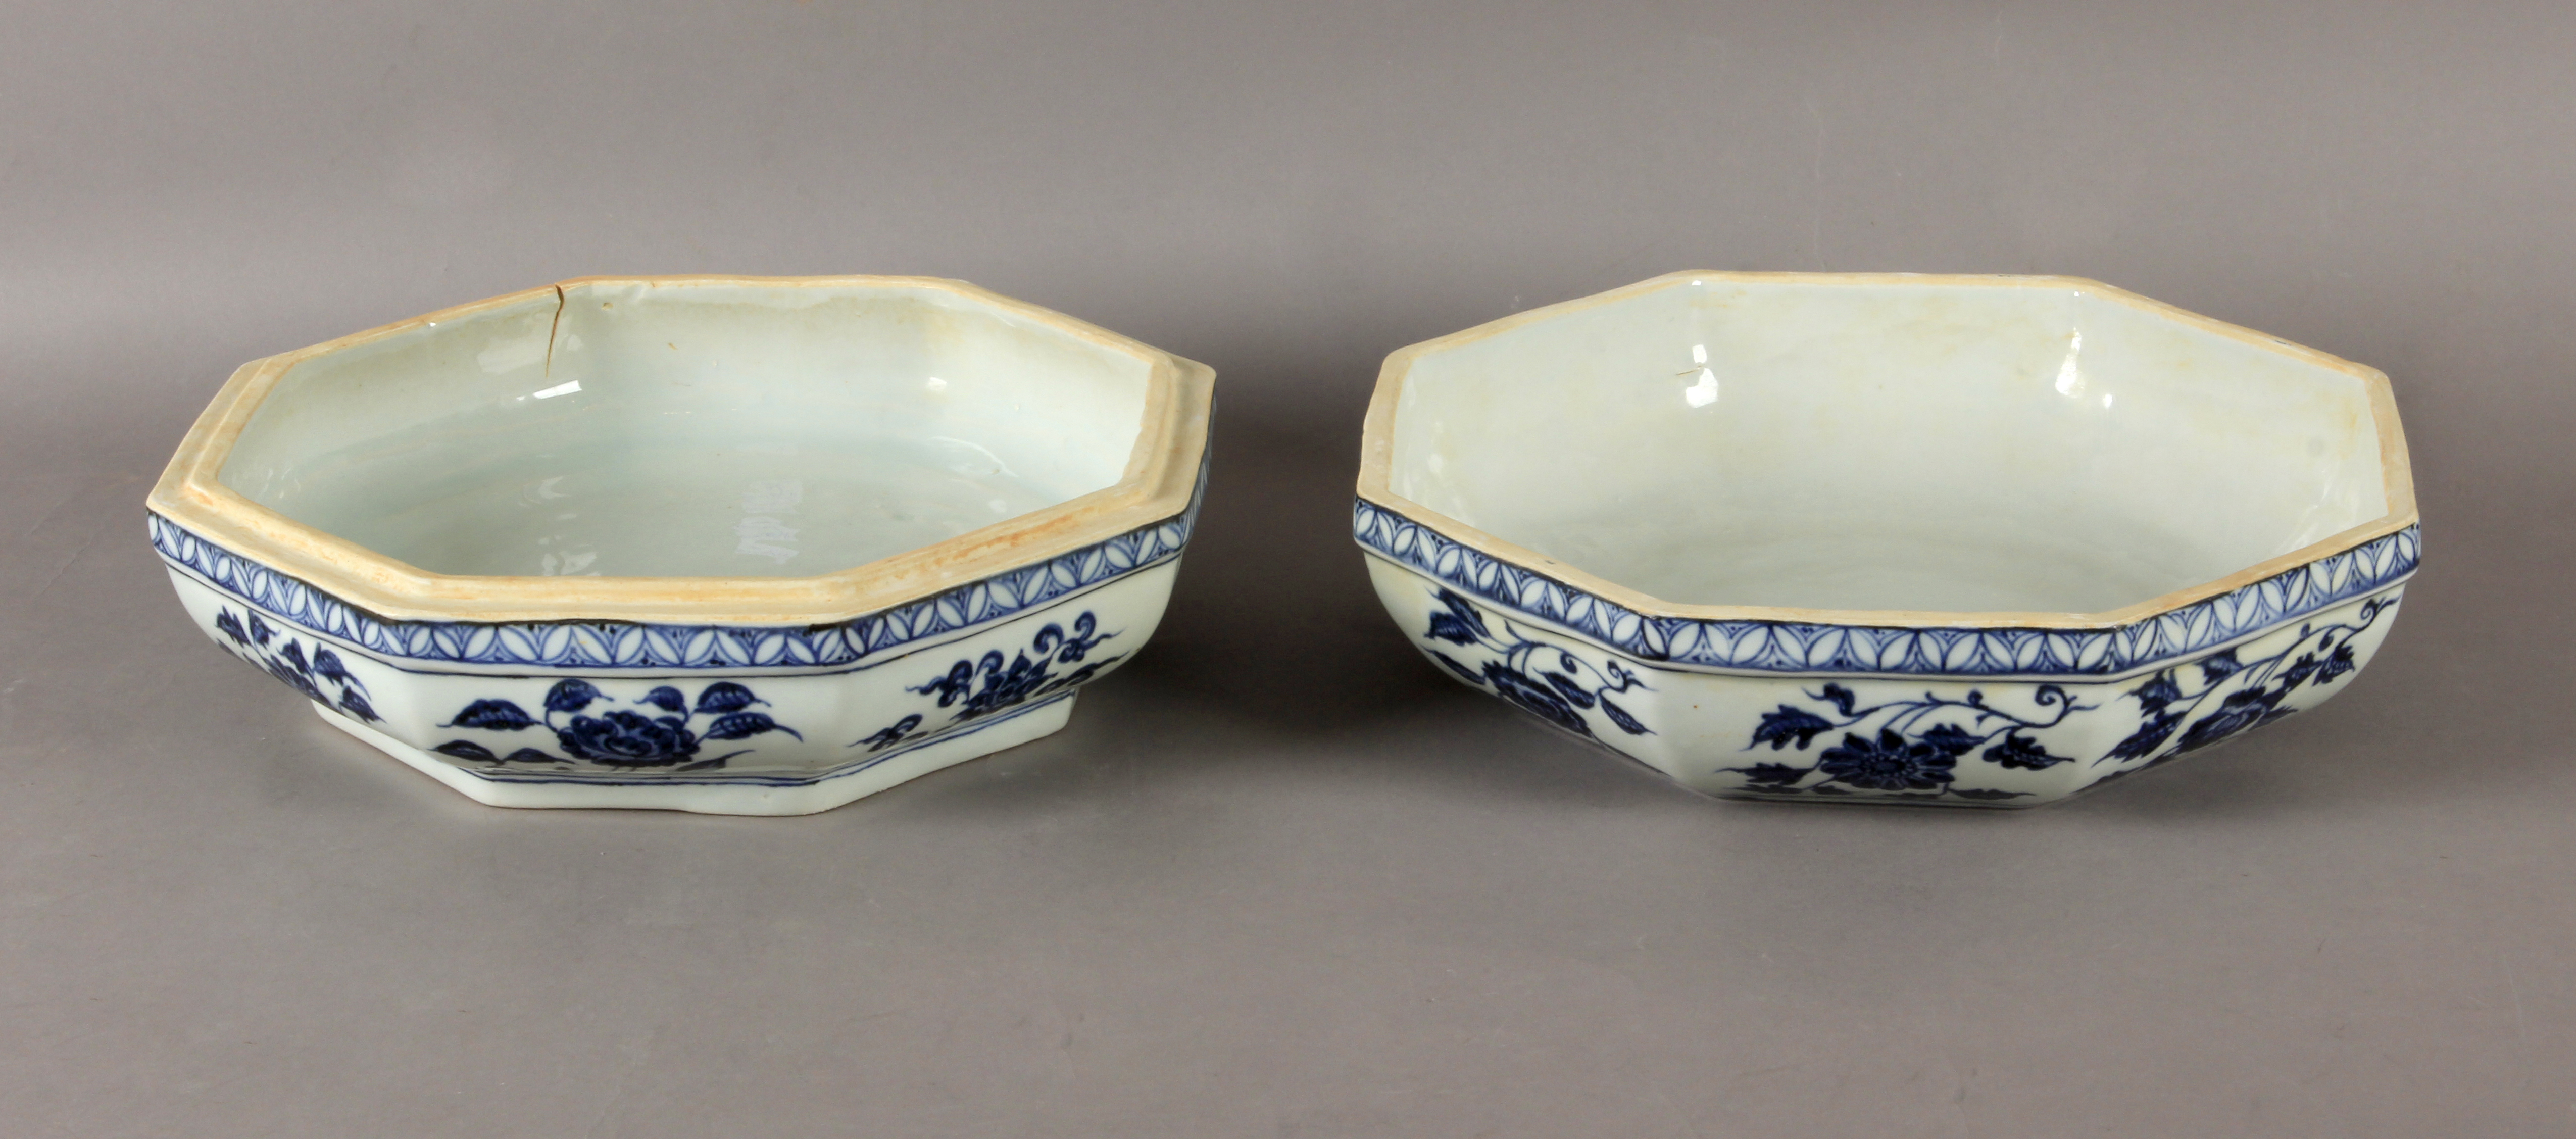 A 20th century Chinese porcelain box - Image 2 of 2